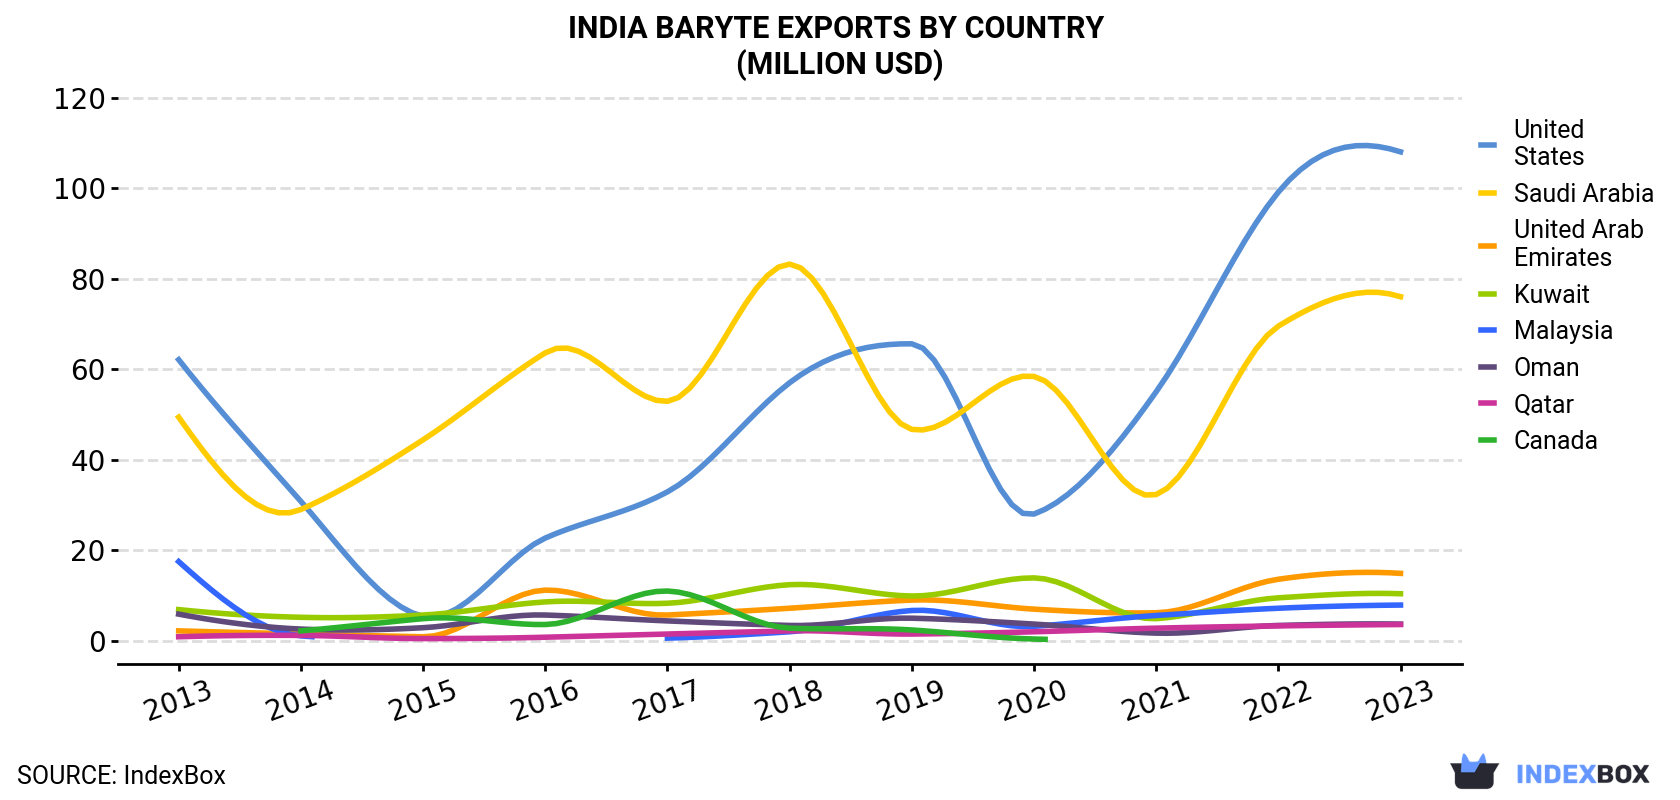 India Baryte Exports By Country (Million USD)